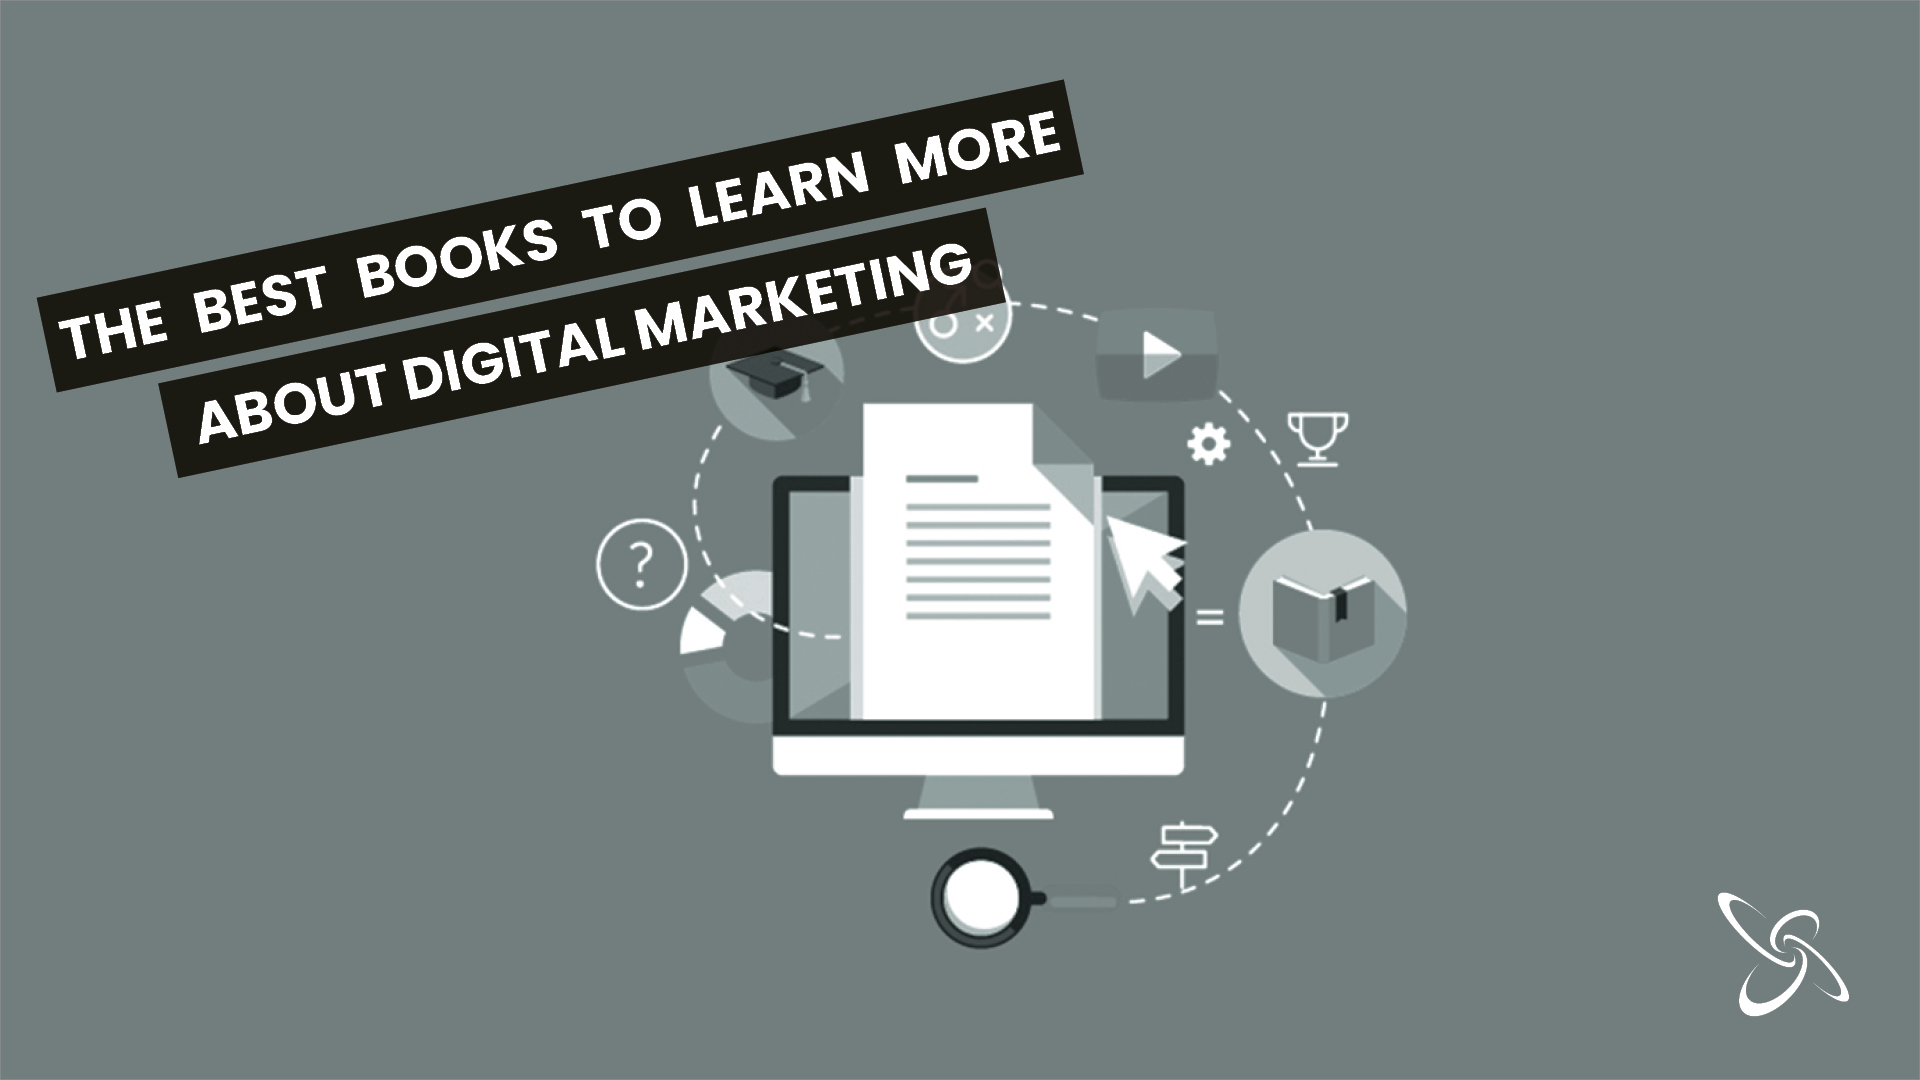 The best books to learn more about digital marketing